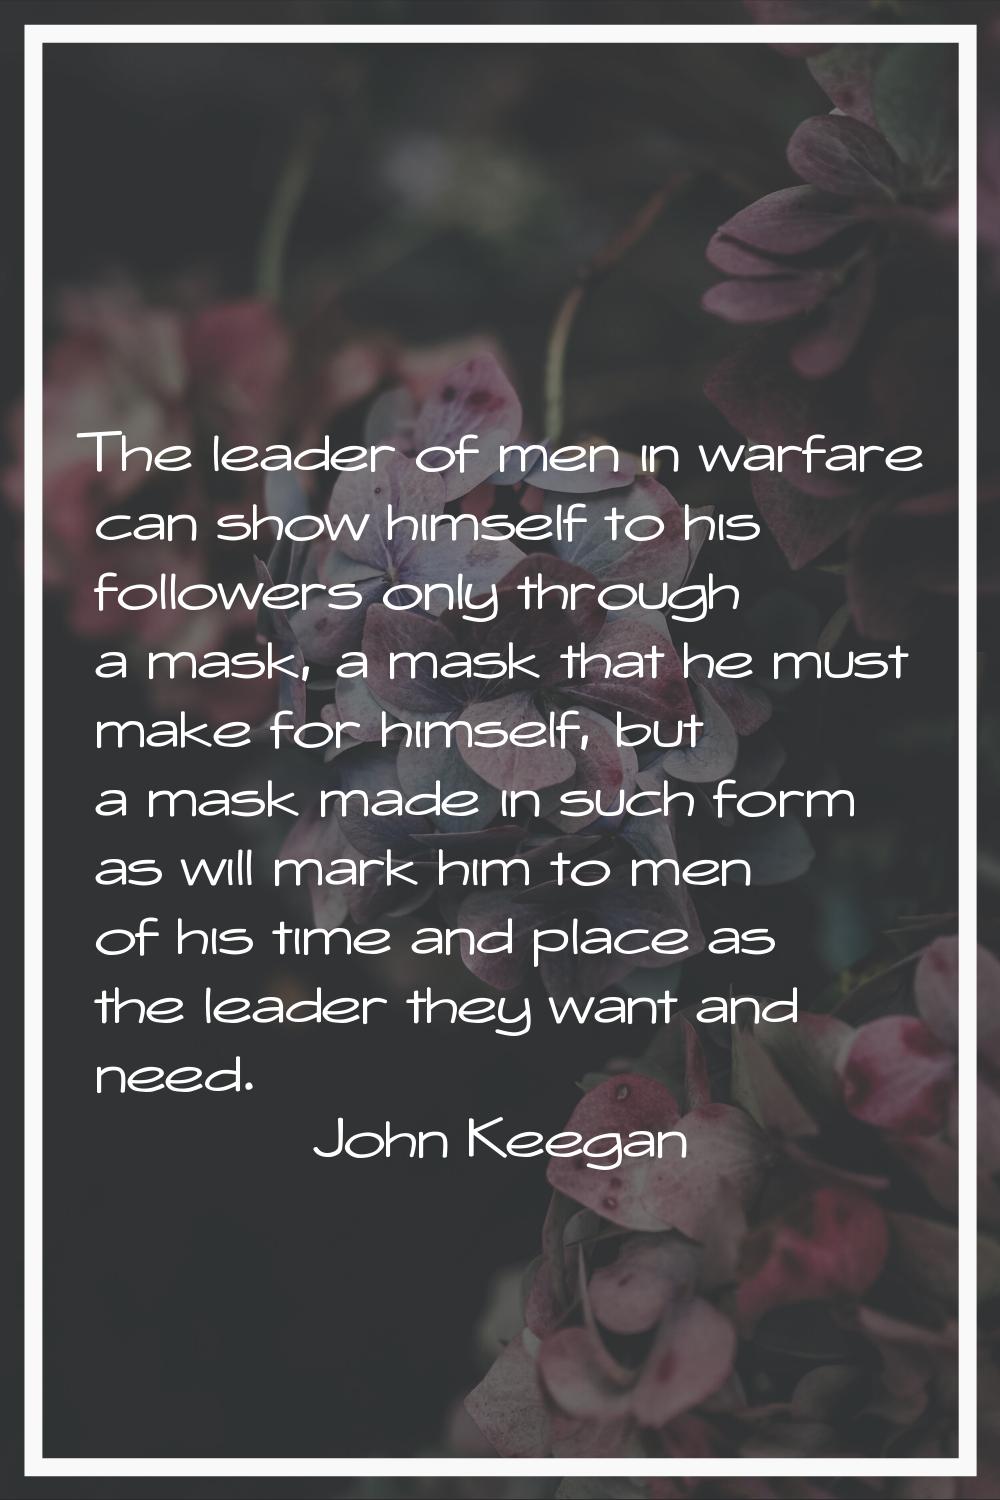 The leader of men in warfare can show himself to his followers only through a mask, a mask that he 